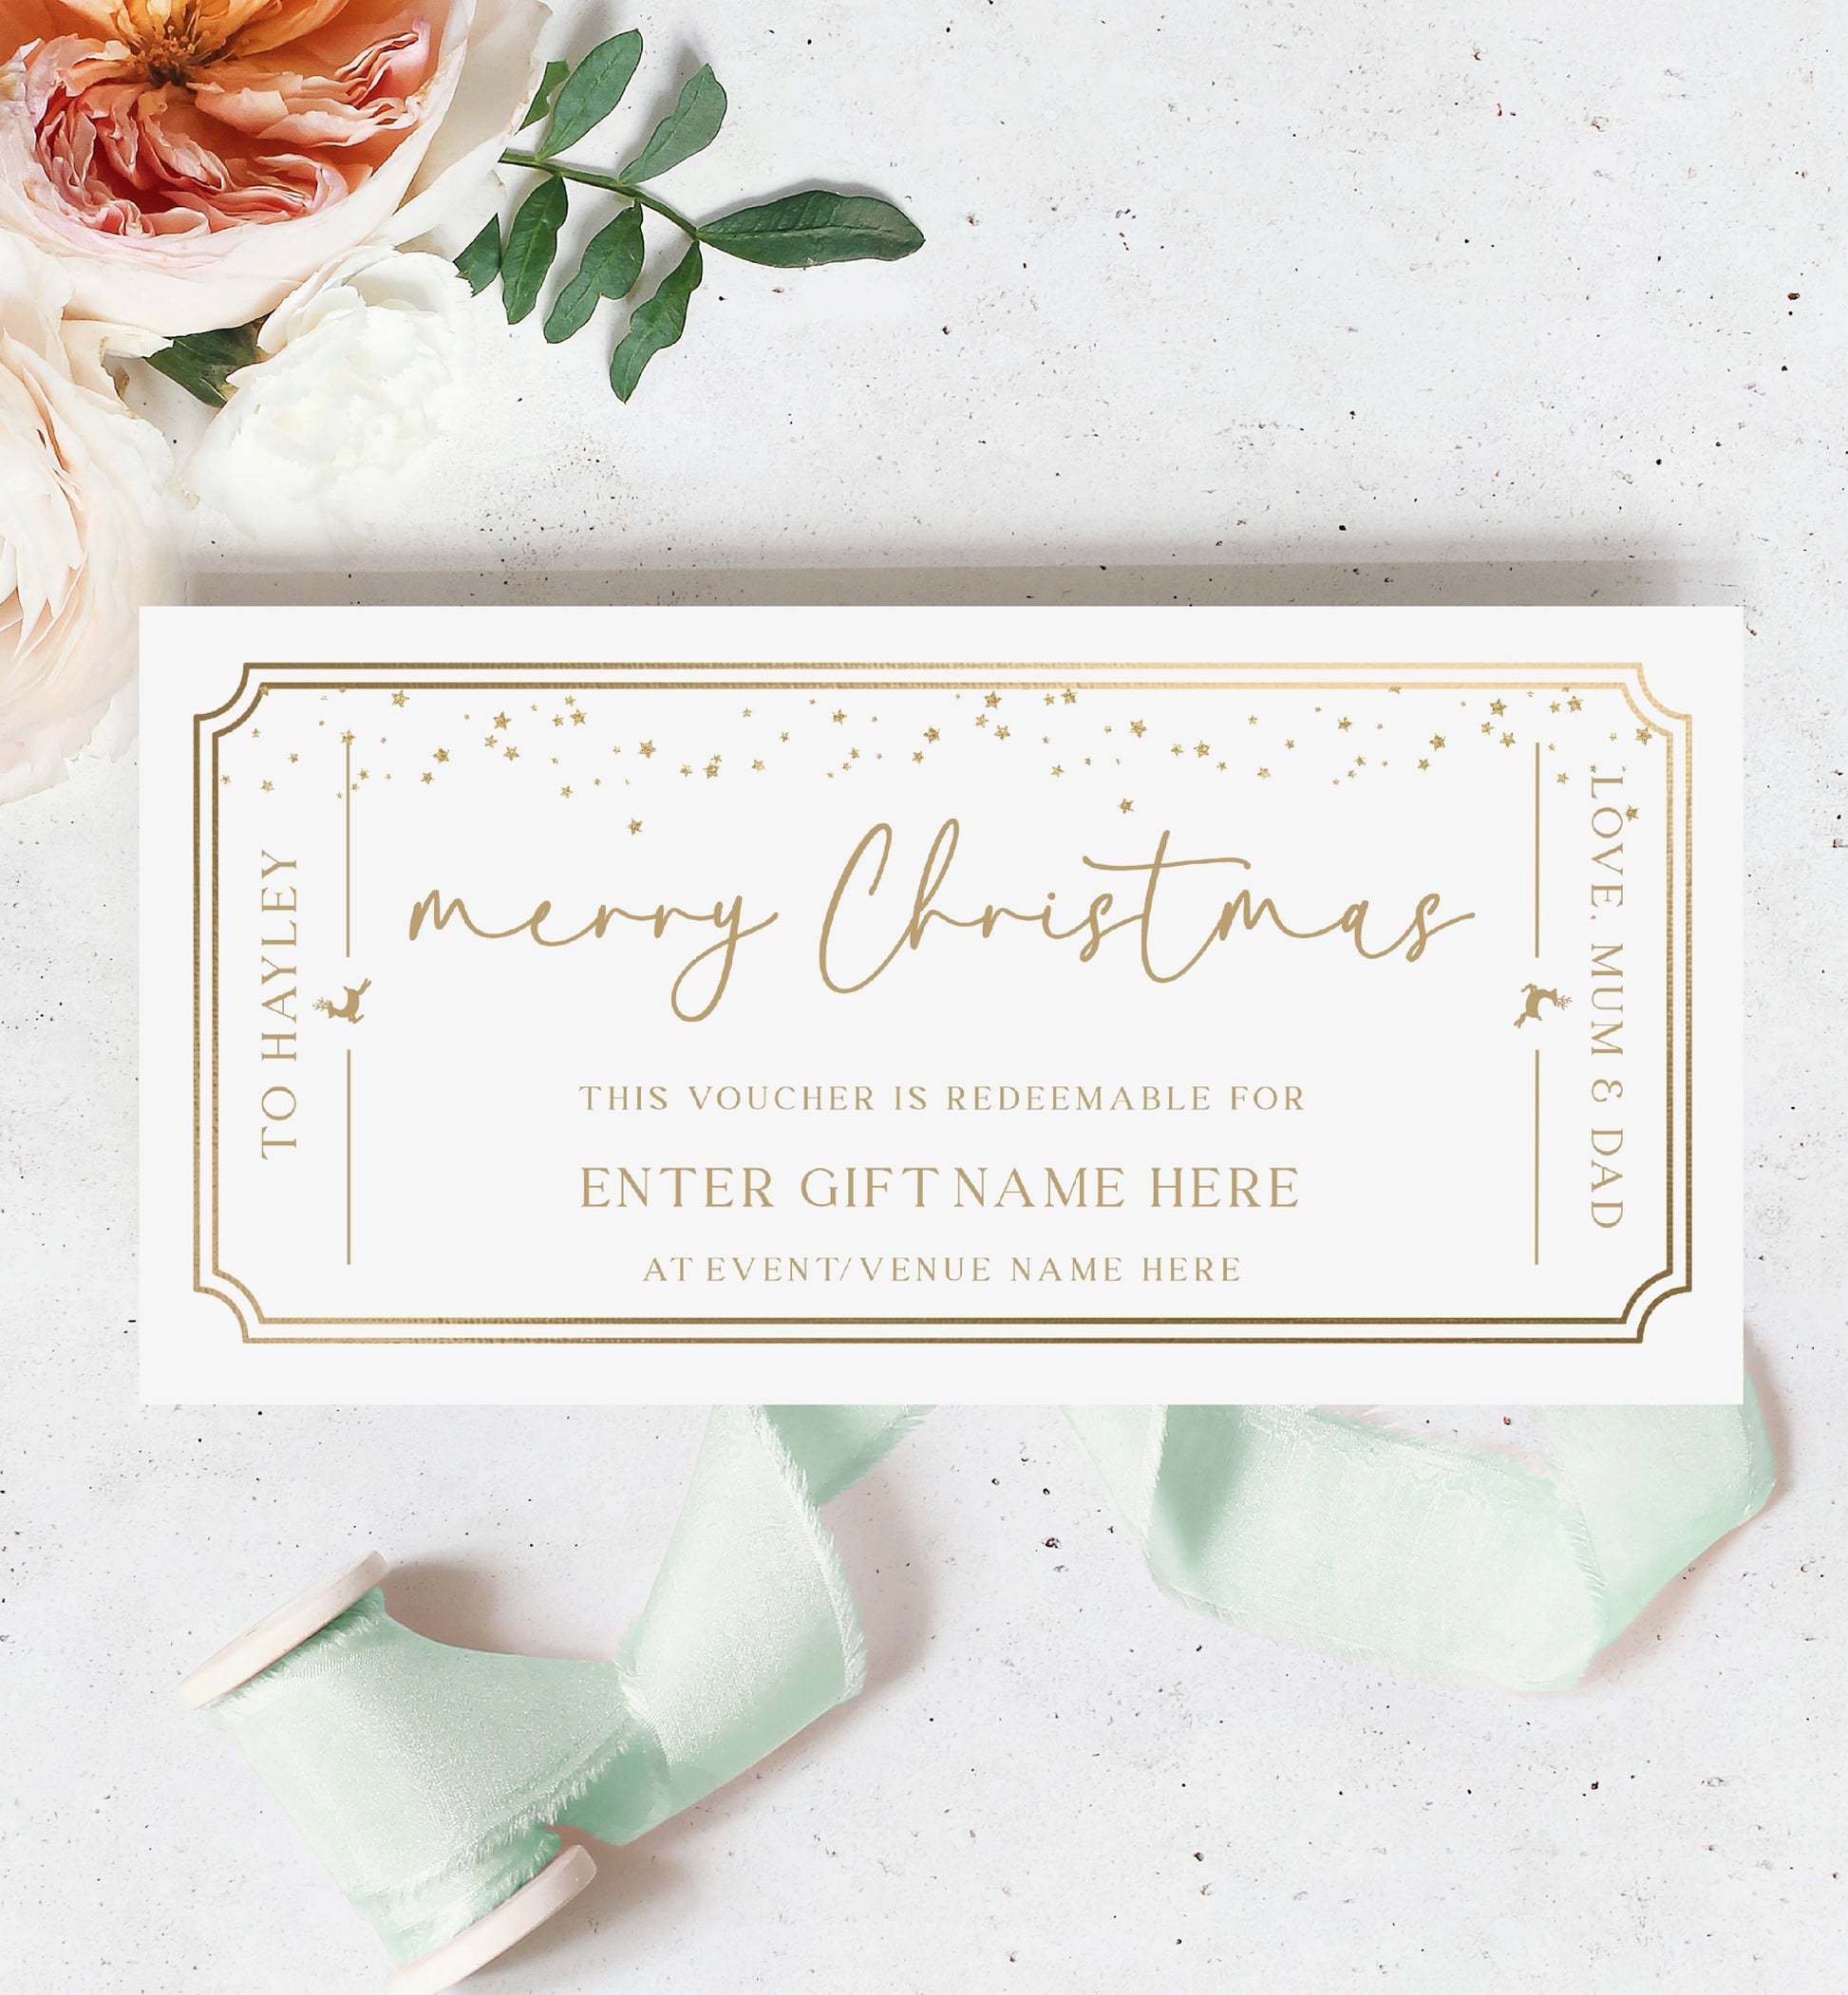 Christmas Concert Ticket Gift Voucher Template, Fully Custom Printable Gift Certificate, Music Show Ticket Christmas Present, Paintly